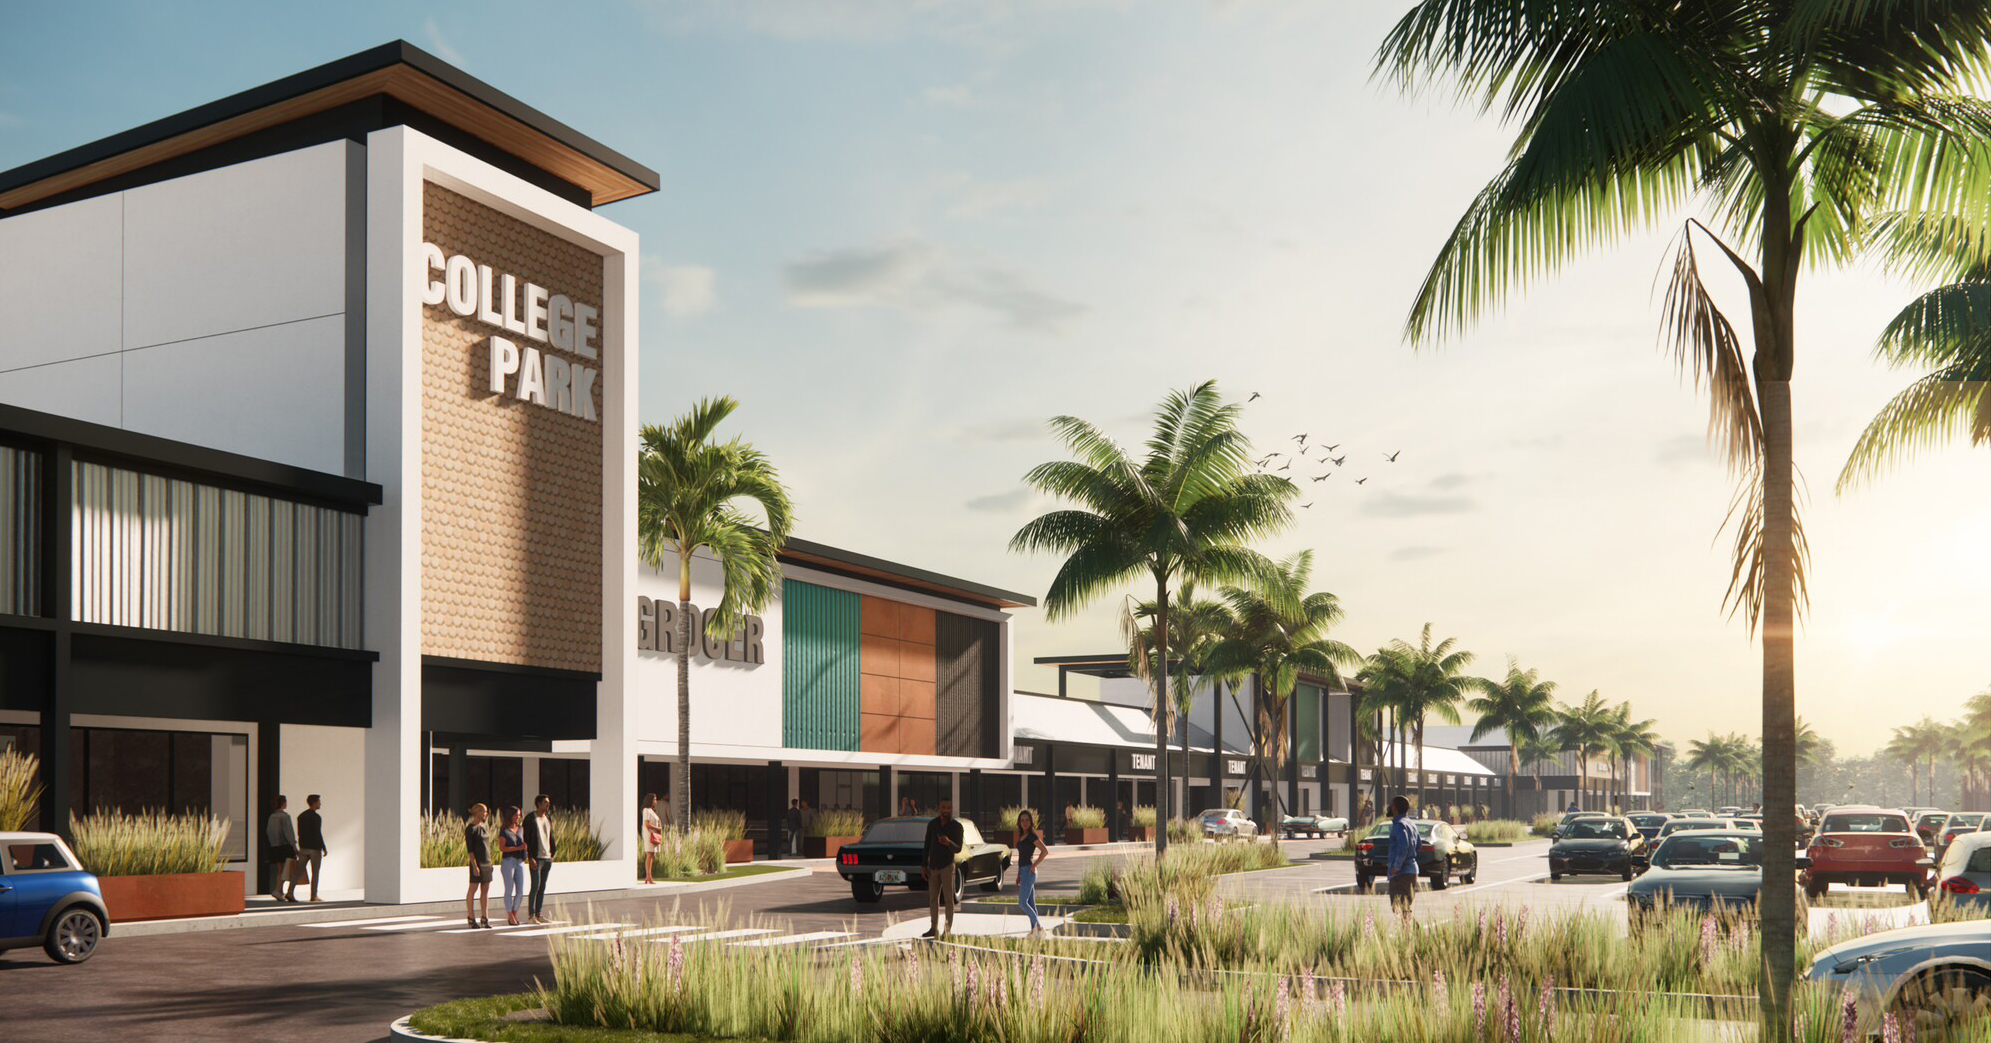 An artist's rendering of the College Park shopping center in Arlington. College Park is the former Town & Country Shopping Center.